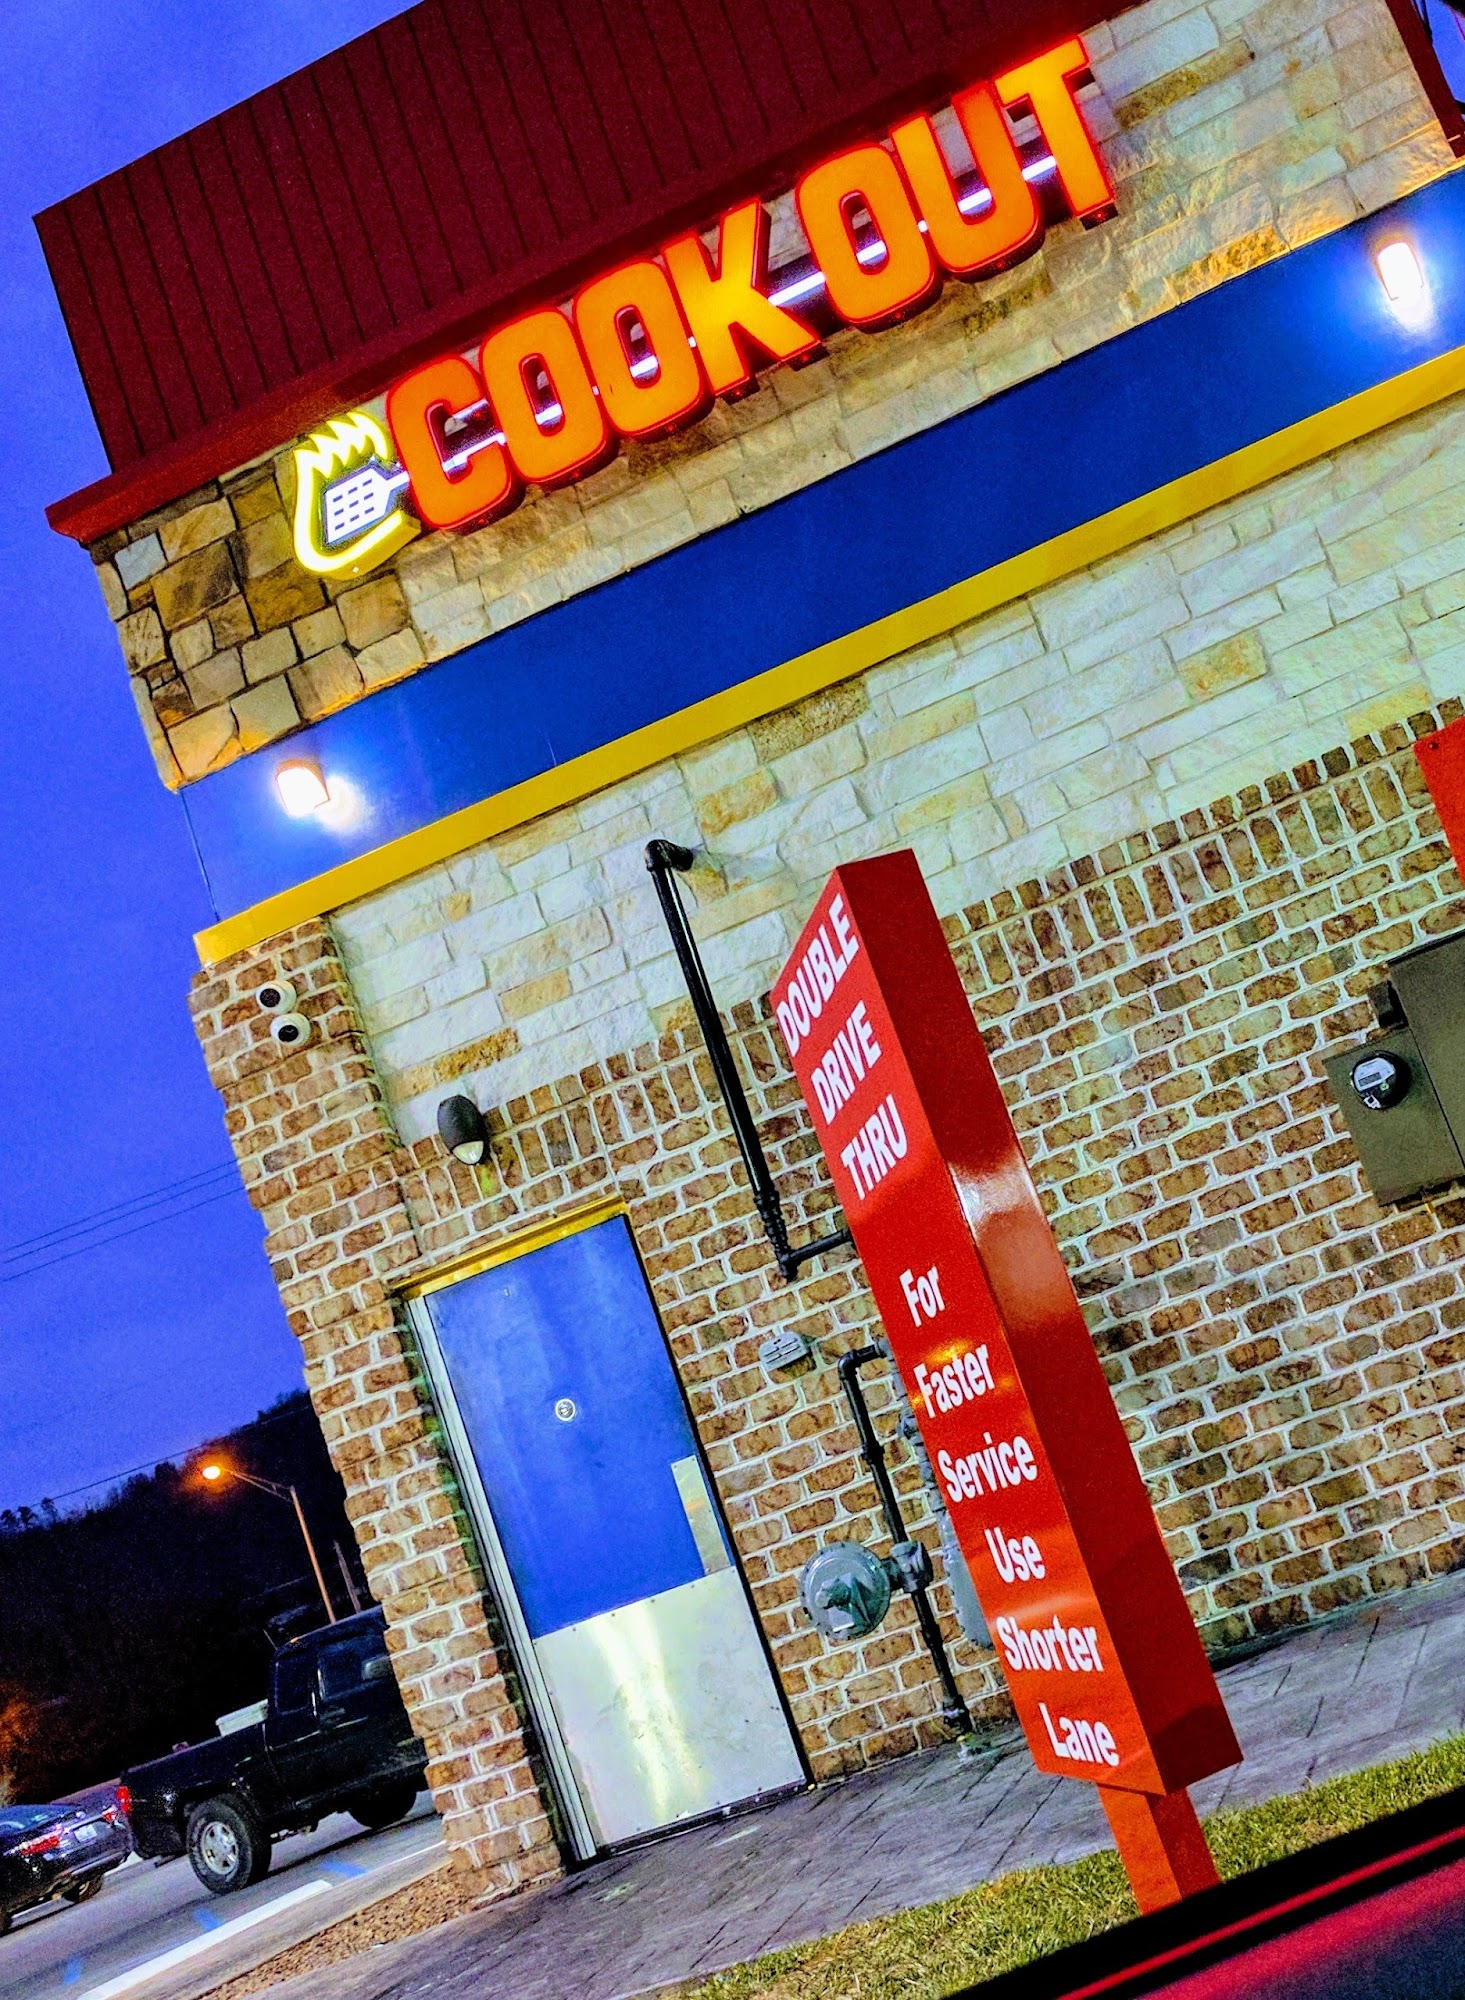 Cook Out